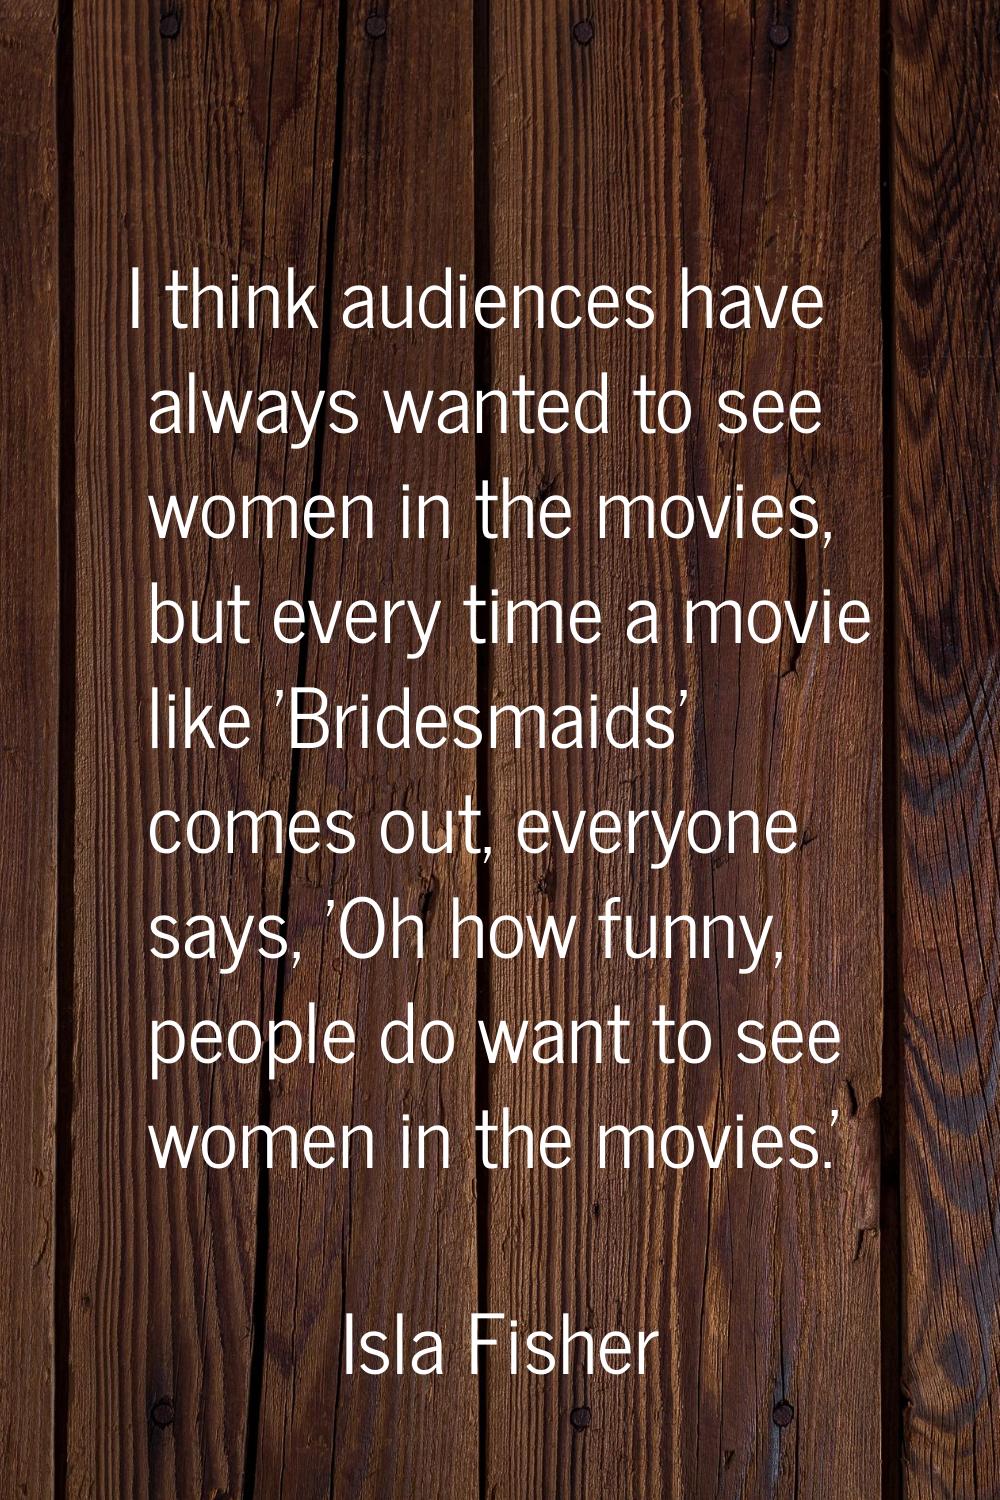 I think audiences have always wanted to see women in the movies, but every time a movie like 'Bride